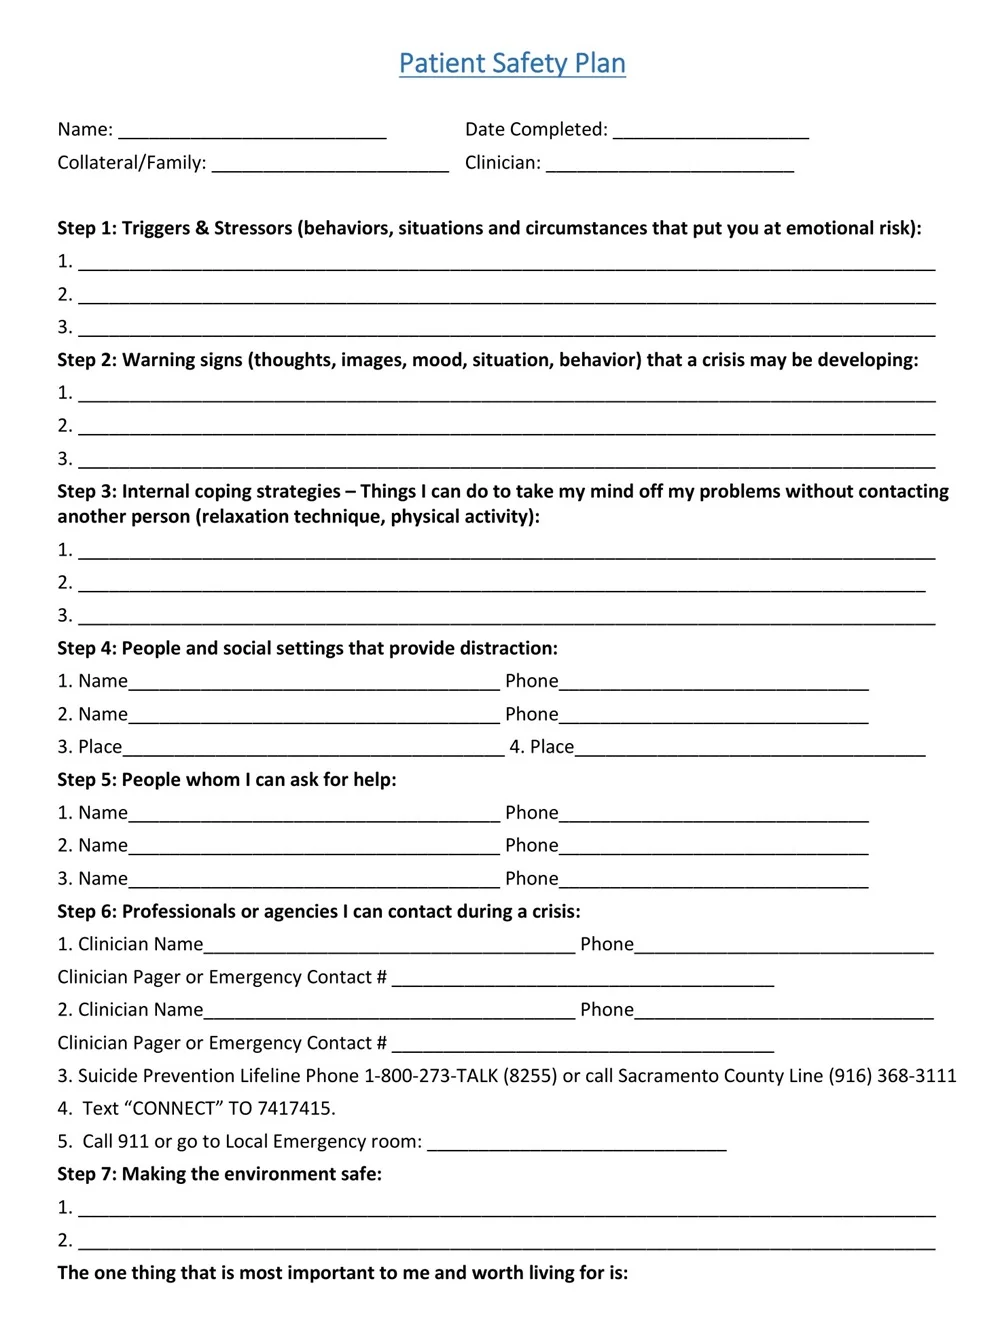 Blank Patient Safety Plan Template